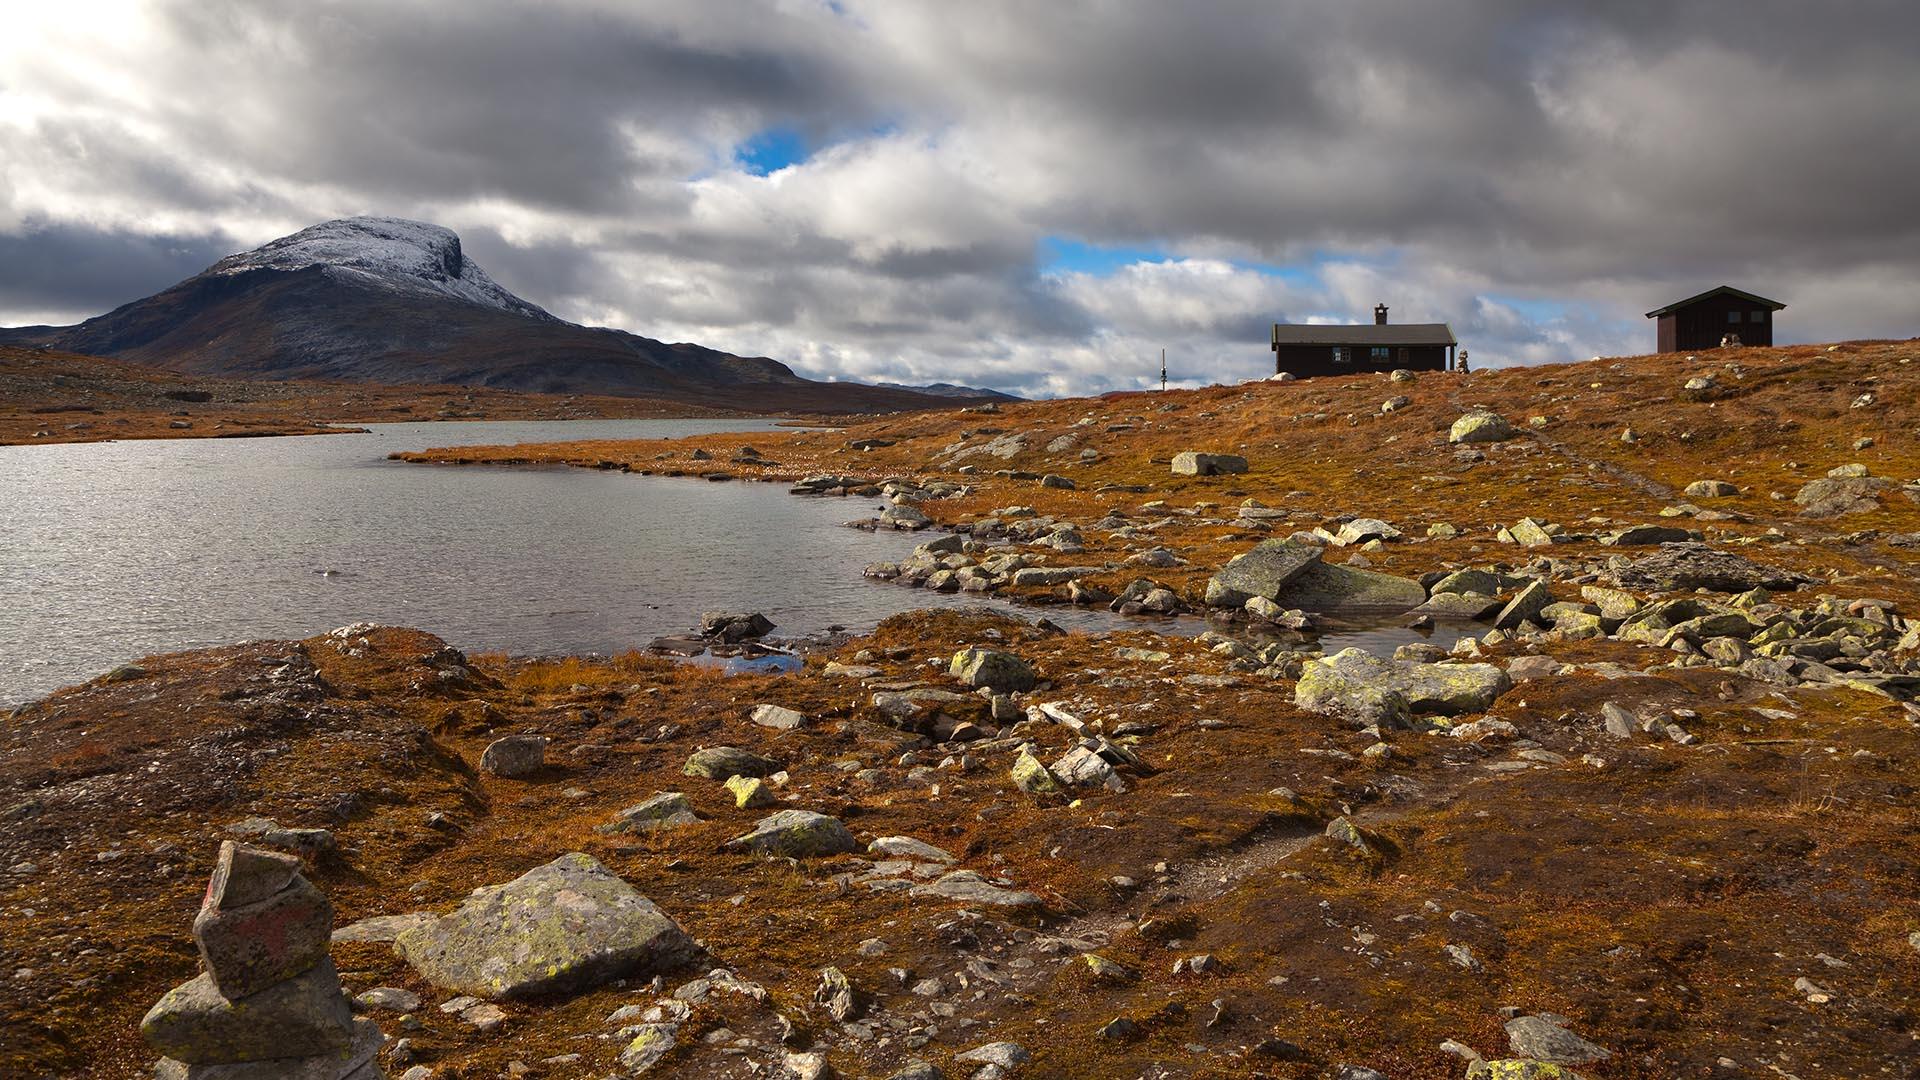 Two cabins by a lake in open highland country with a mountain in the background. It is autumn, the ground is orange-brown-coloured and snow has been falling on the mountain top.